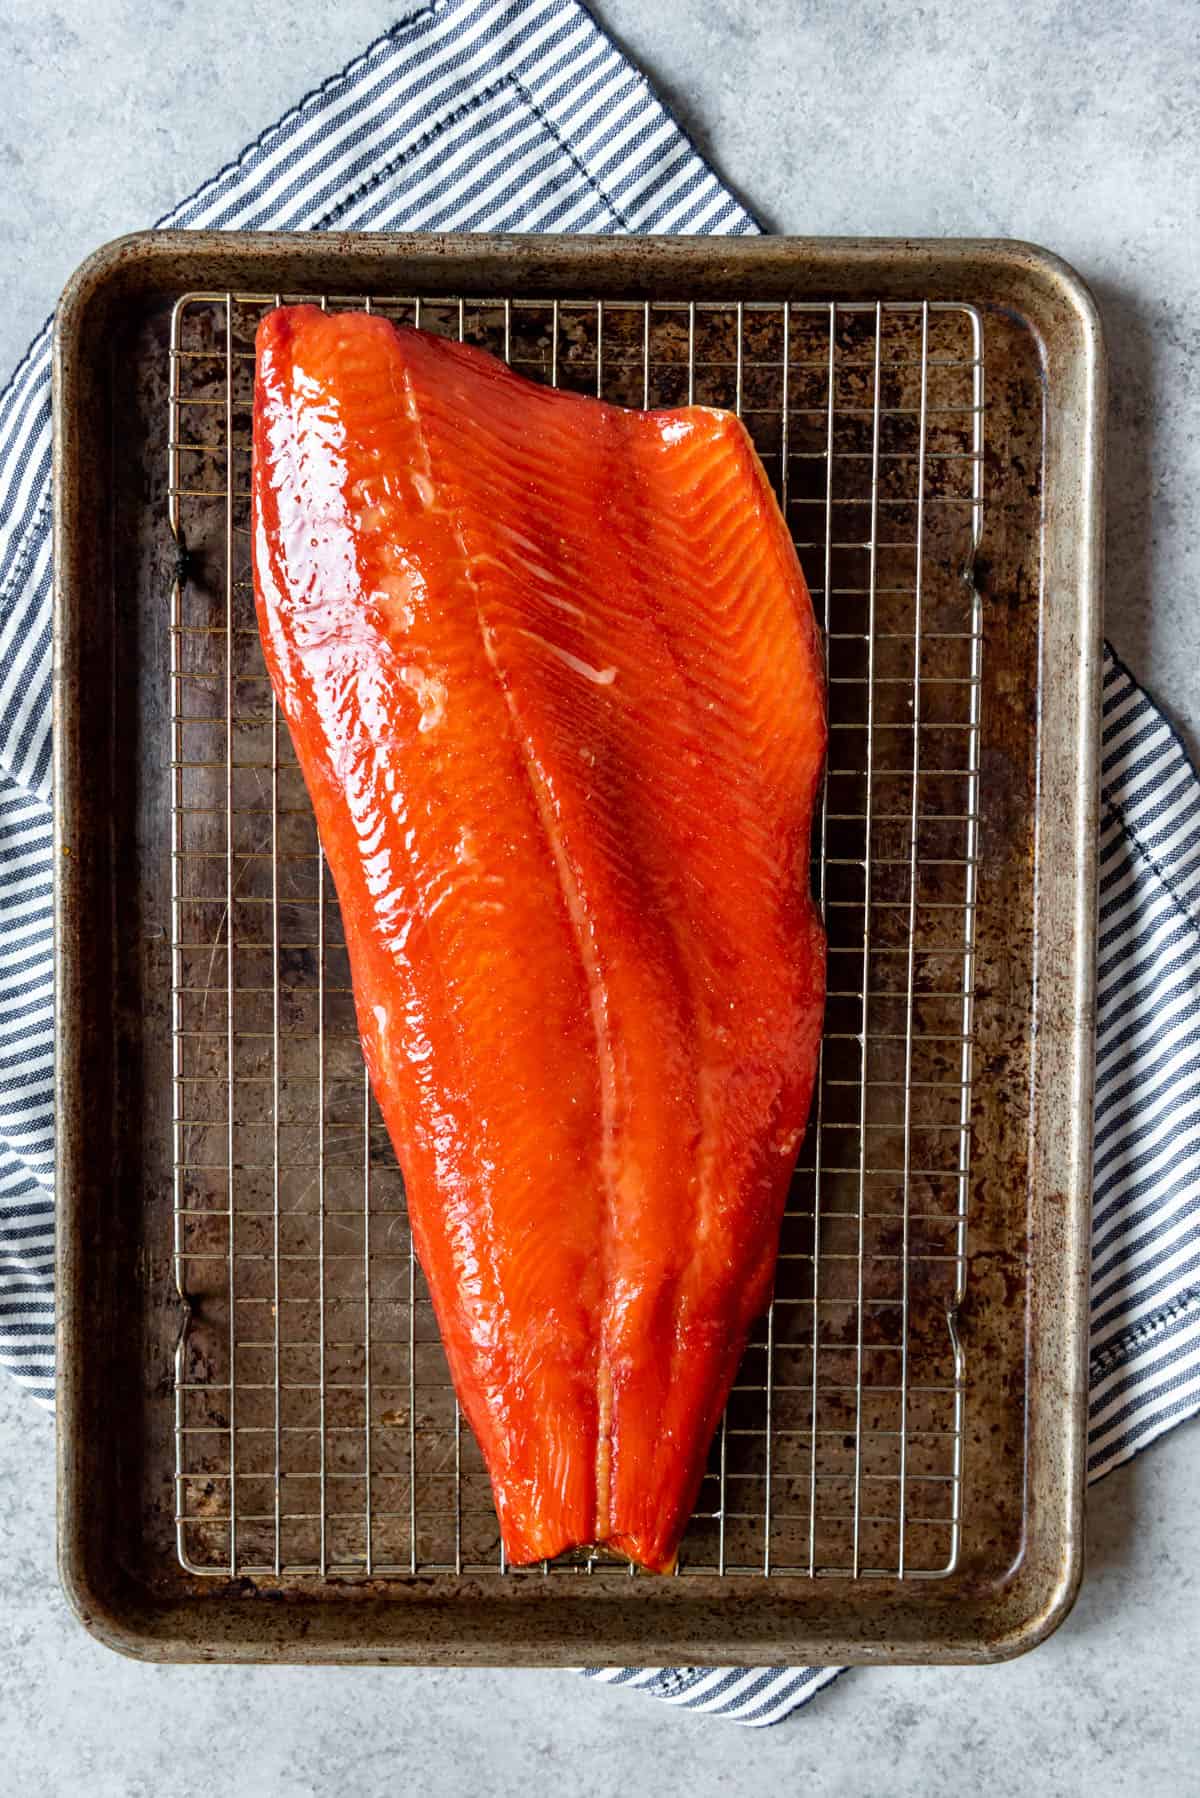 An image of a large piece of wild caught salmon that has been brined, cured, and smoked on a pellet smoker.